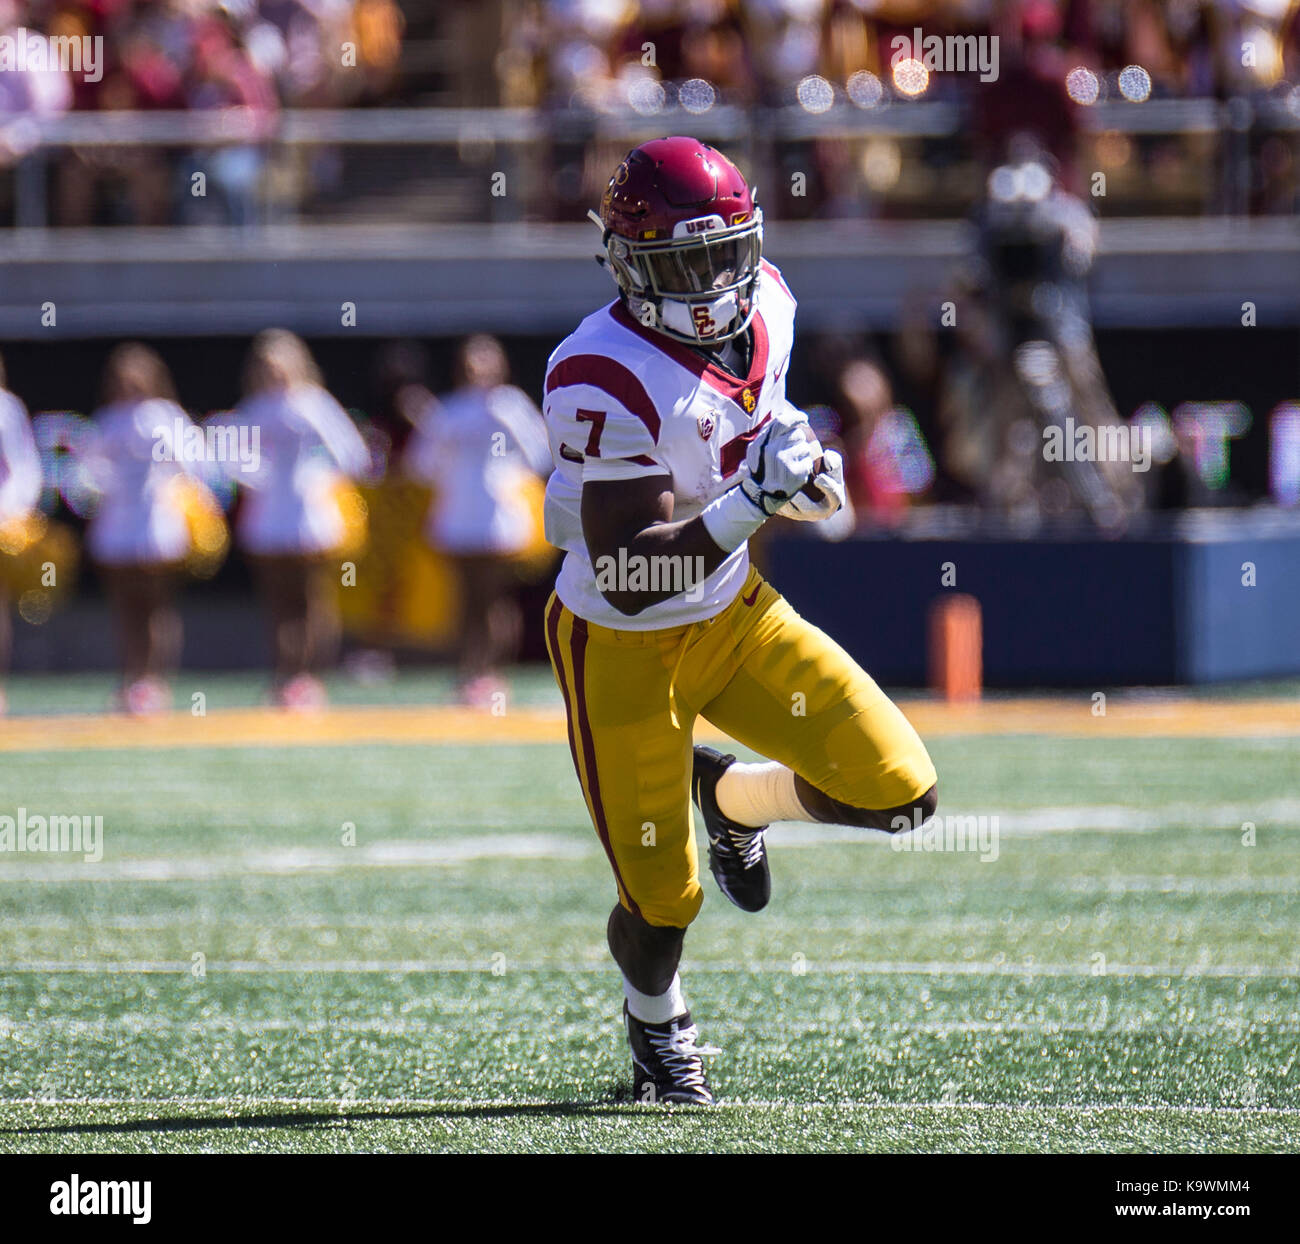 California Memorial Stadium. 23rd Sep, 2017. U.S.A. Trojans running back Stephen Carr (7) game stats 20 carries for 86 YDS and 1 TD during the NCAA Football game between USC Trojans and the California Golden Bears 30-20 win at California Memorial Stadium. Thurman James/CSM/Alamy Live News Stock Photo